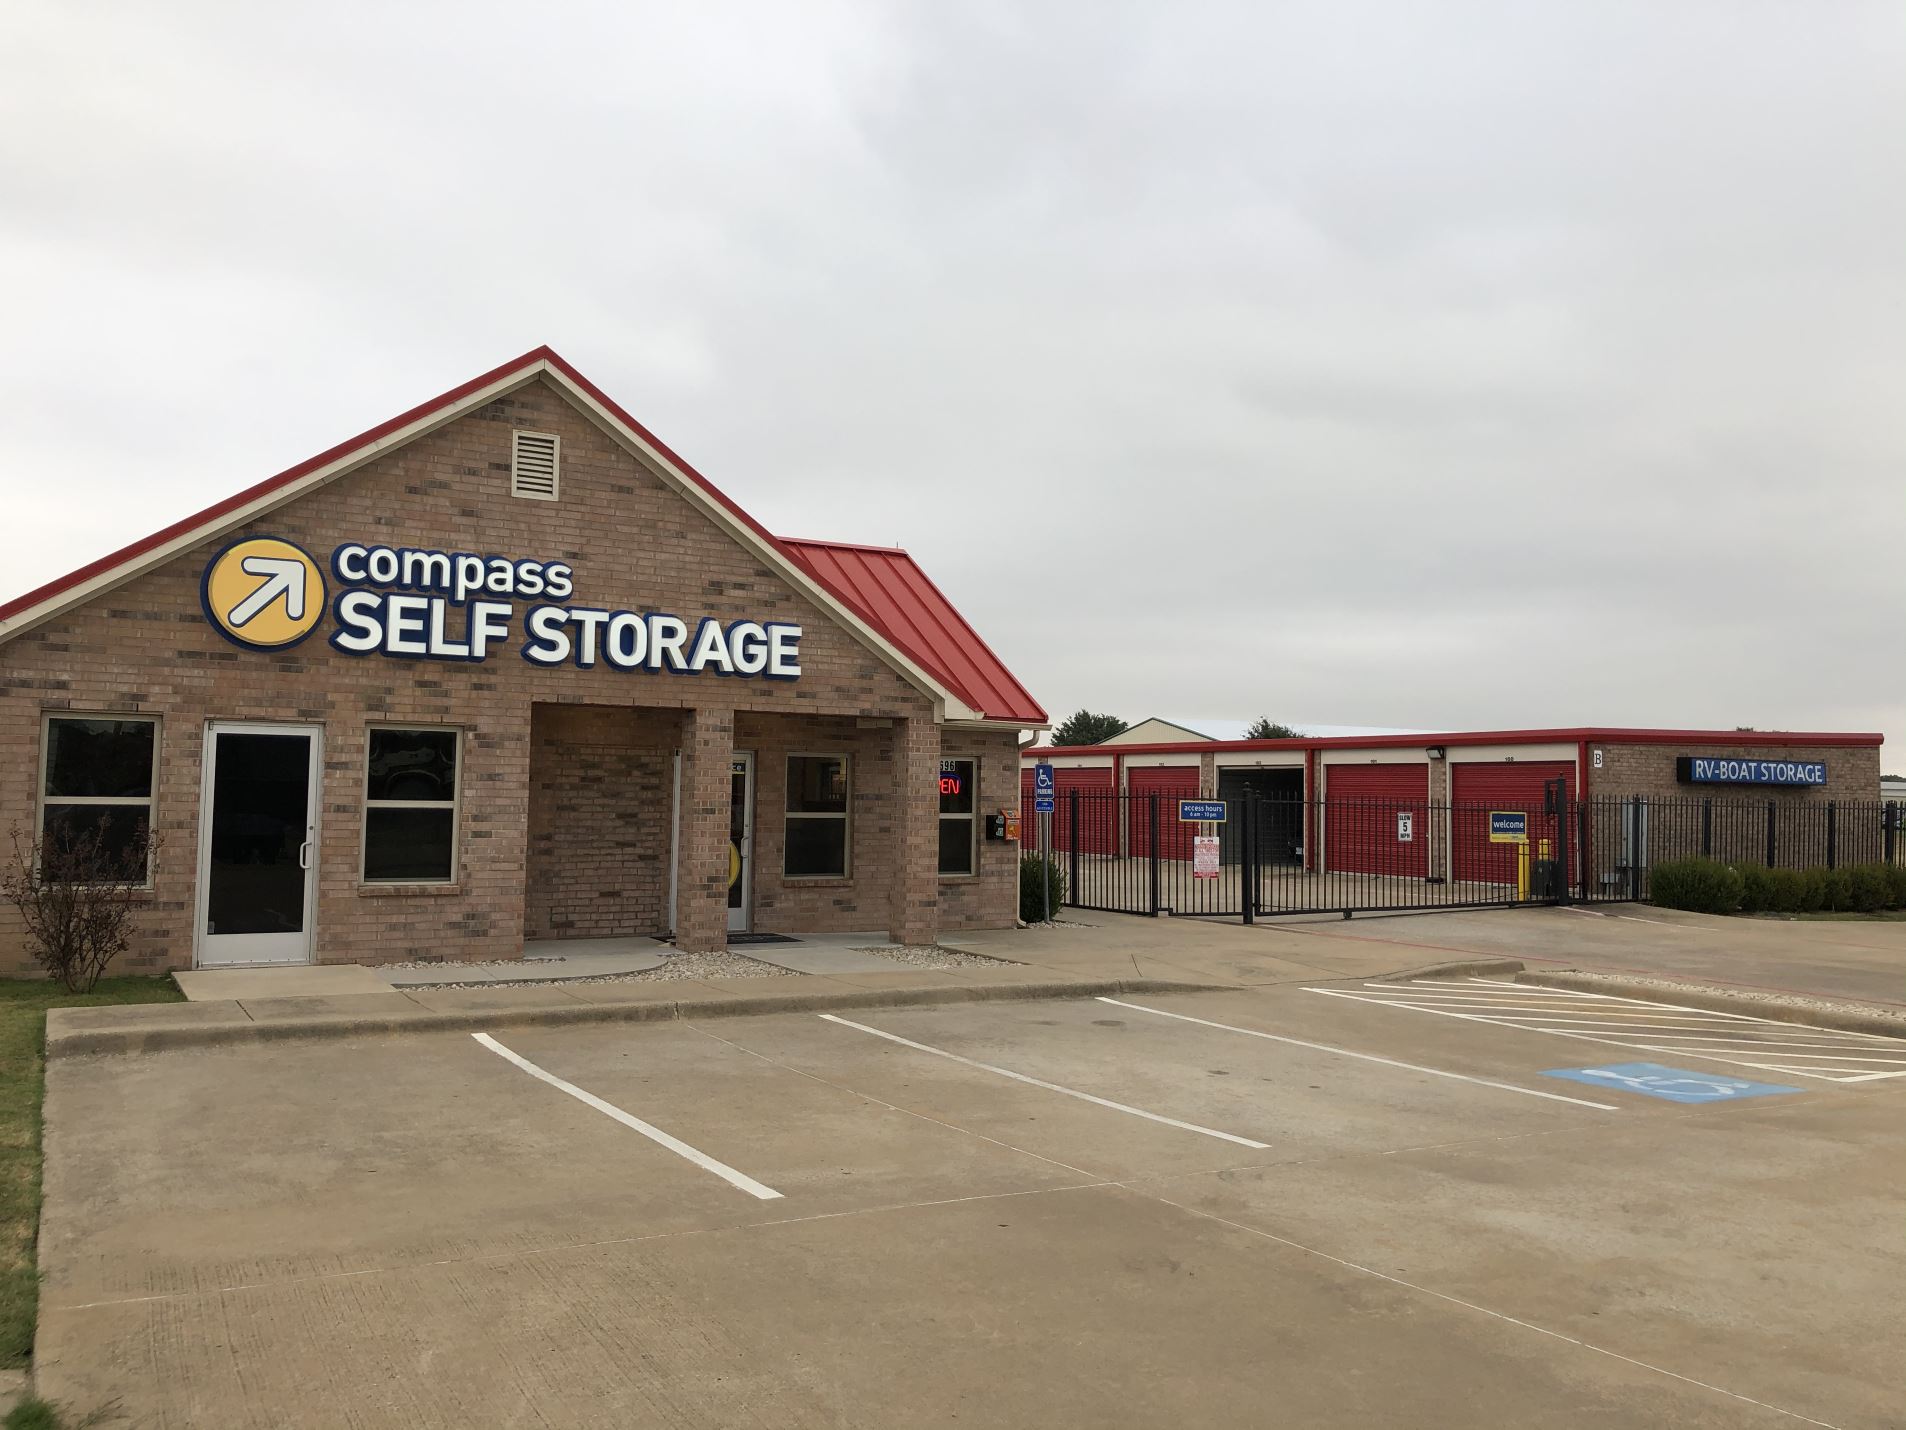 15 Cheap Storage Units in Mckinney, TX (From $19) - SpareFoot